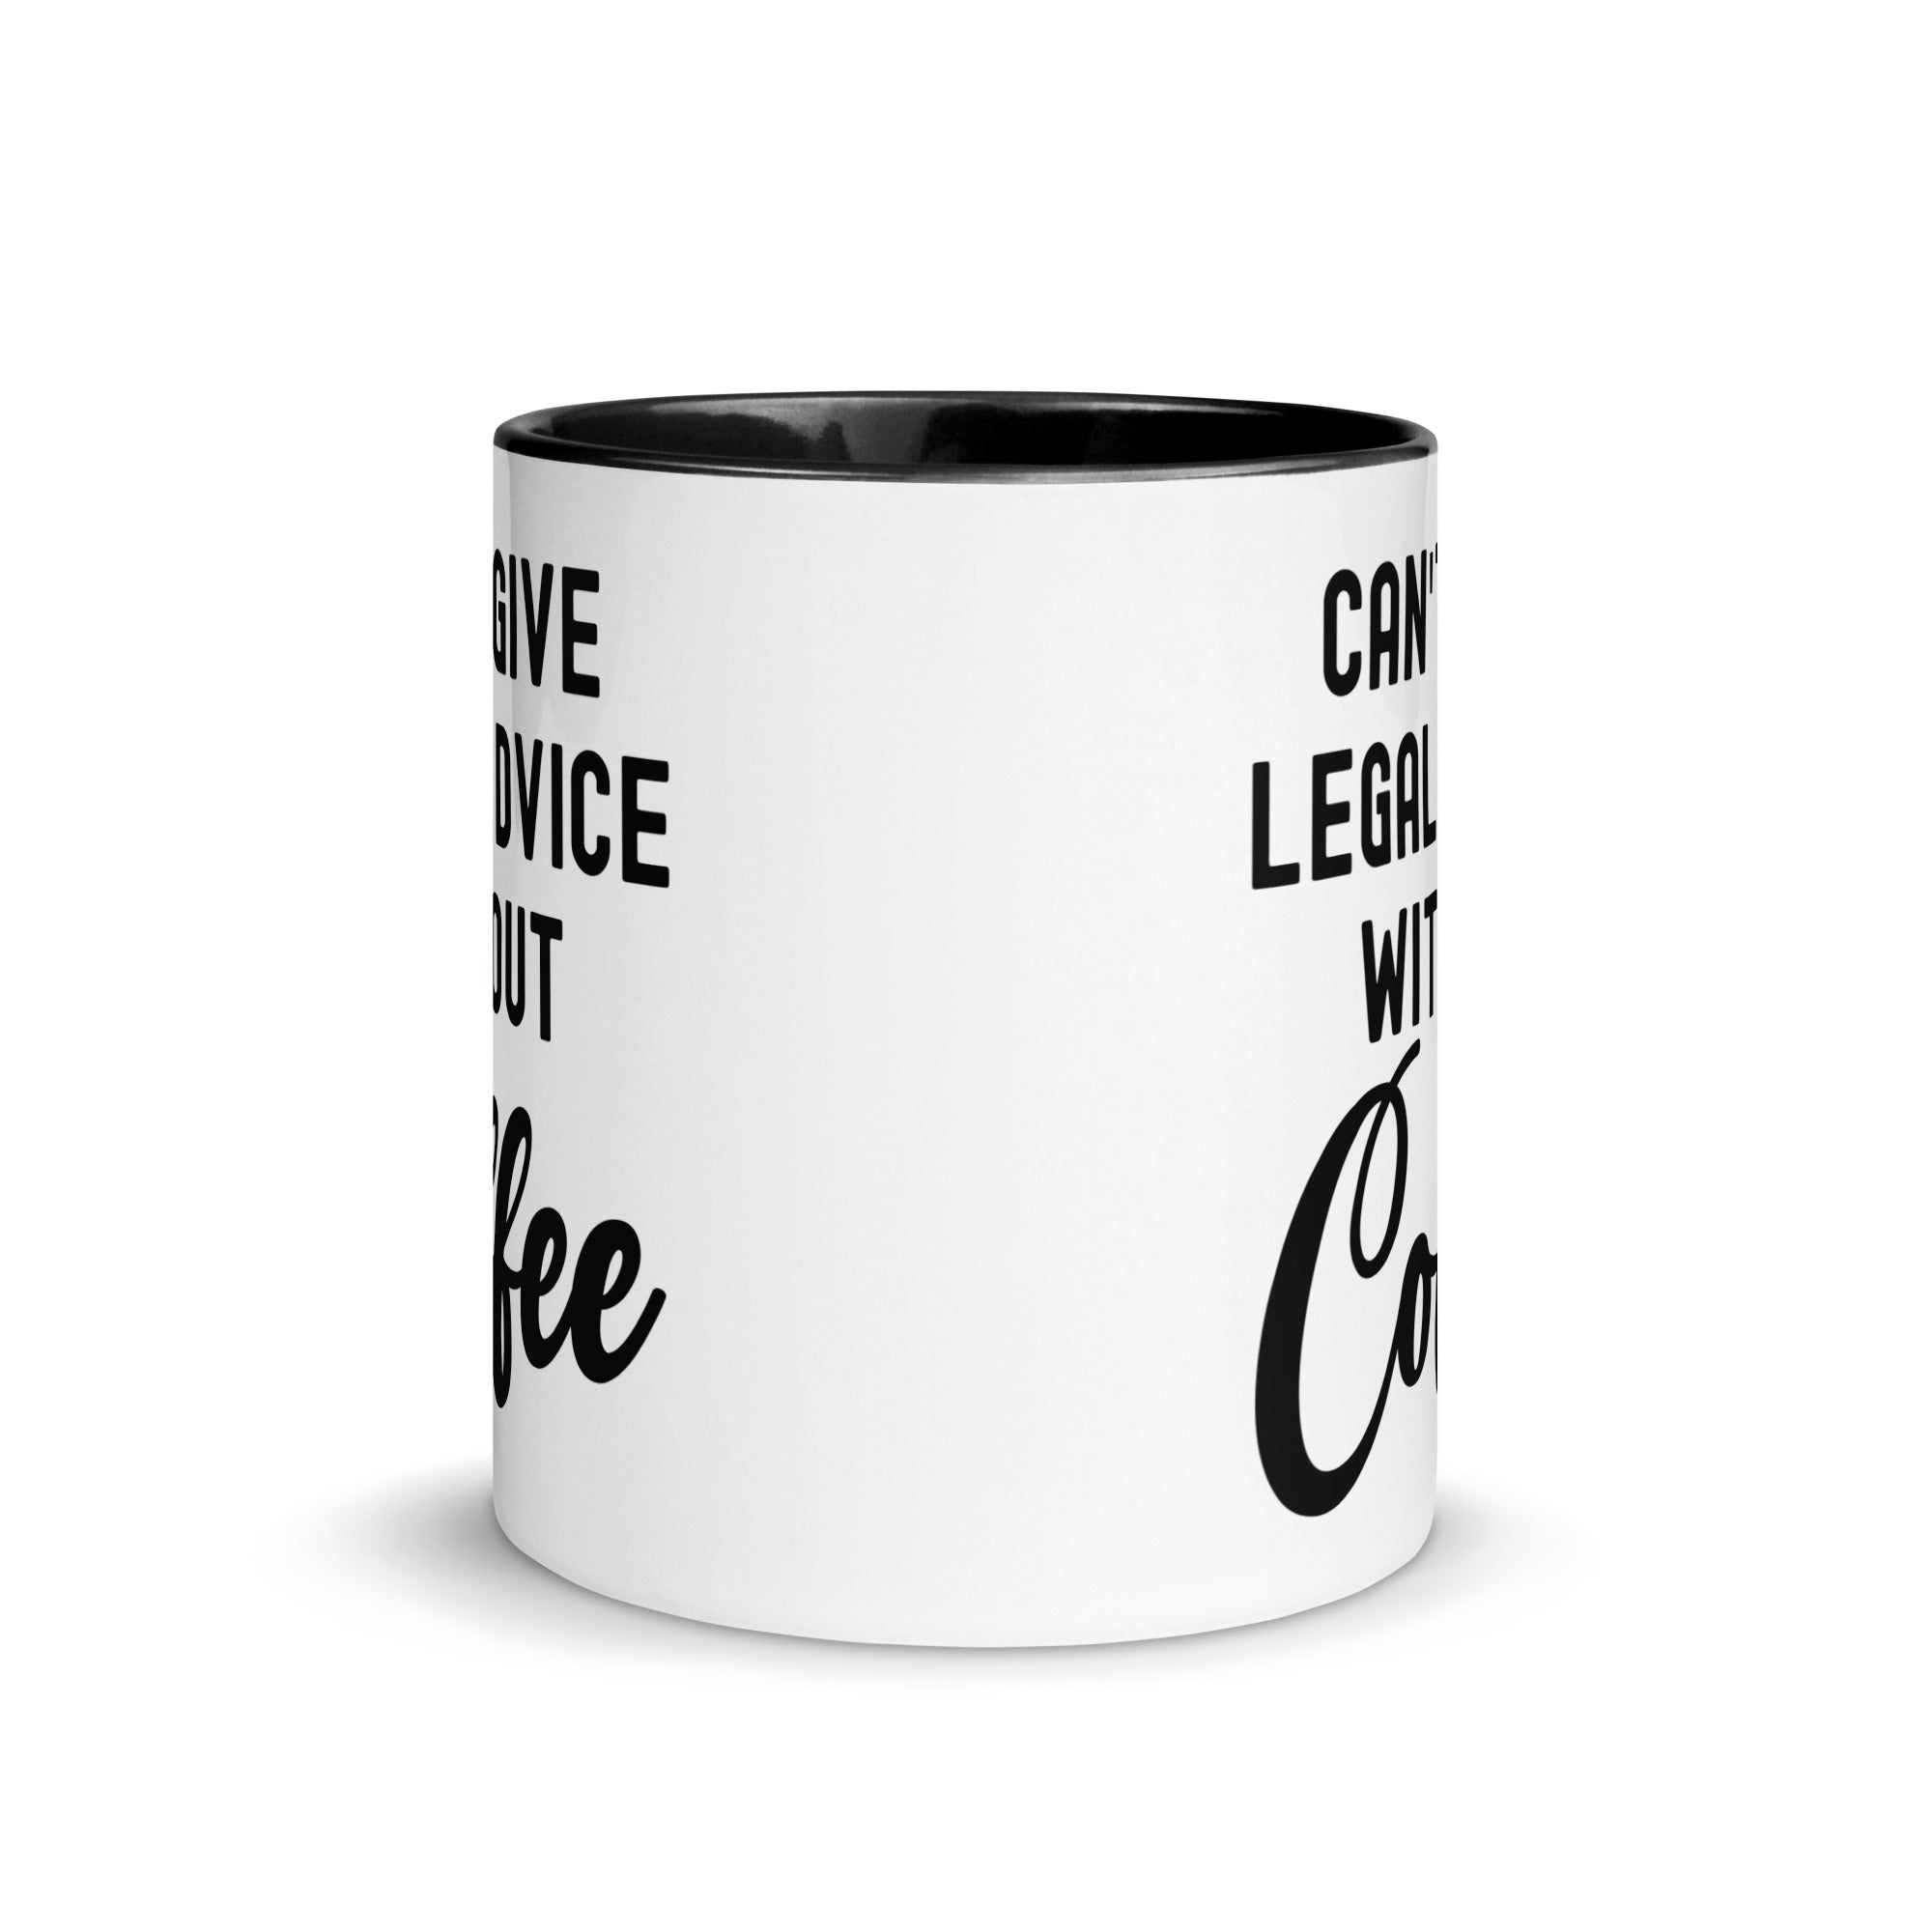 Mug with Color Inside | Can’t give legal advice without coffee